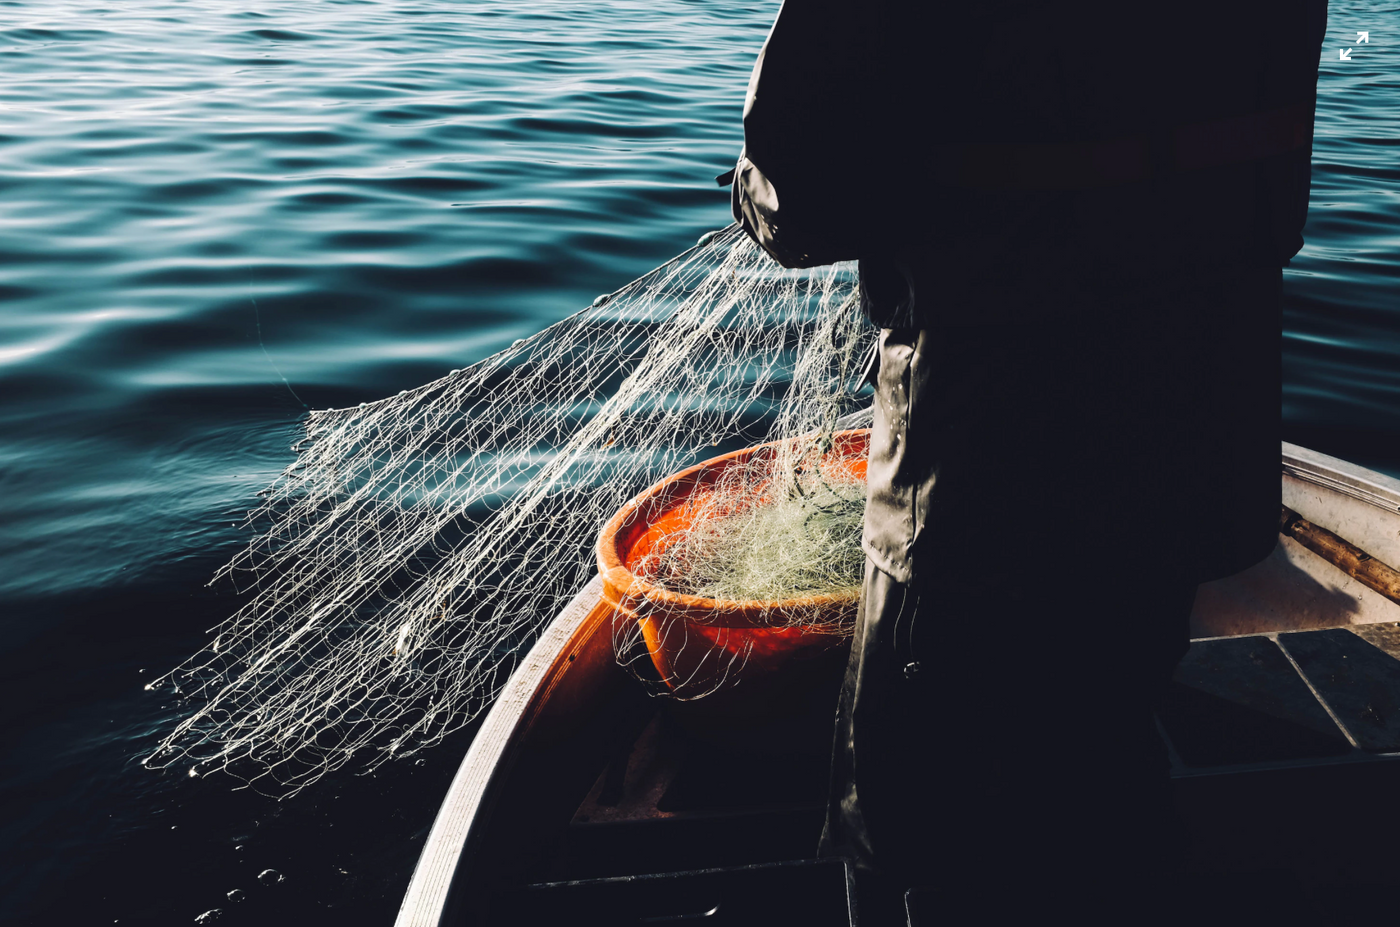 Hidden Costs of the Fishing Industry